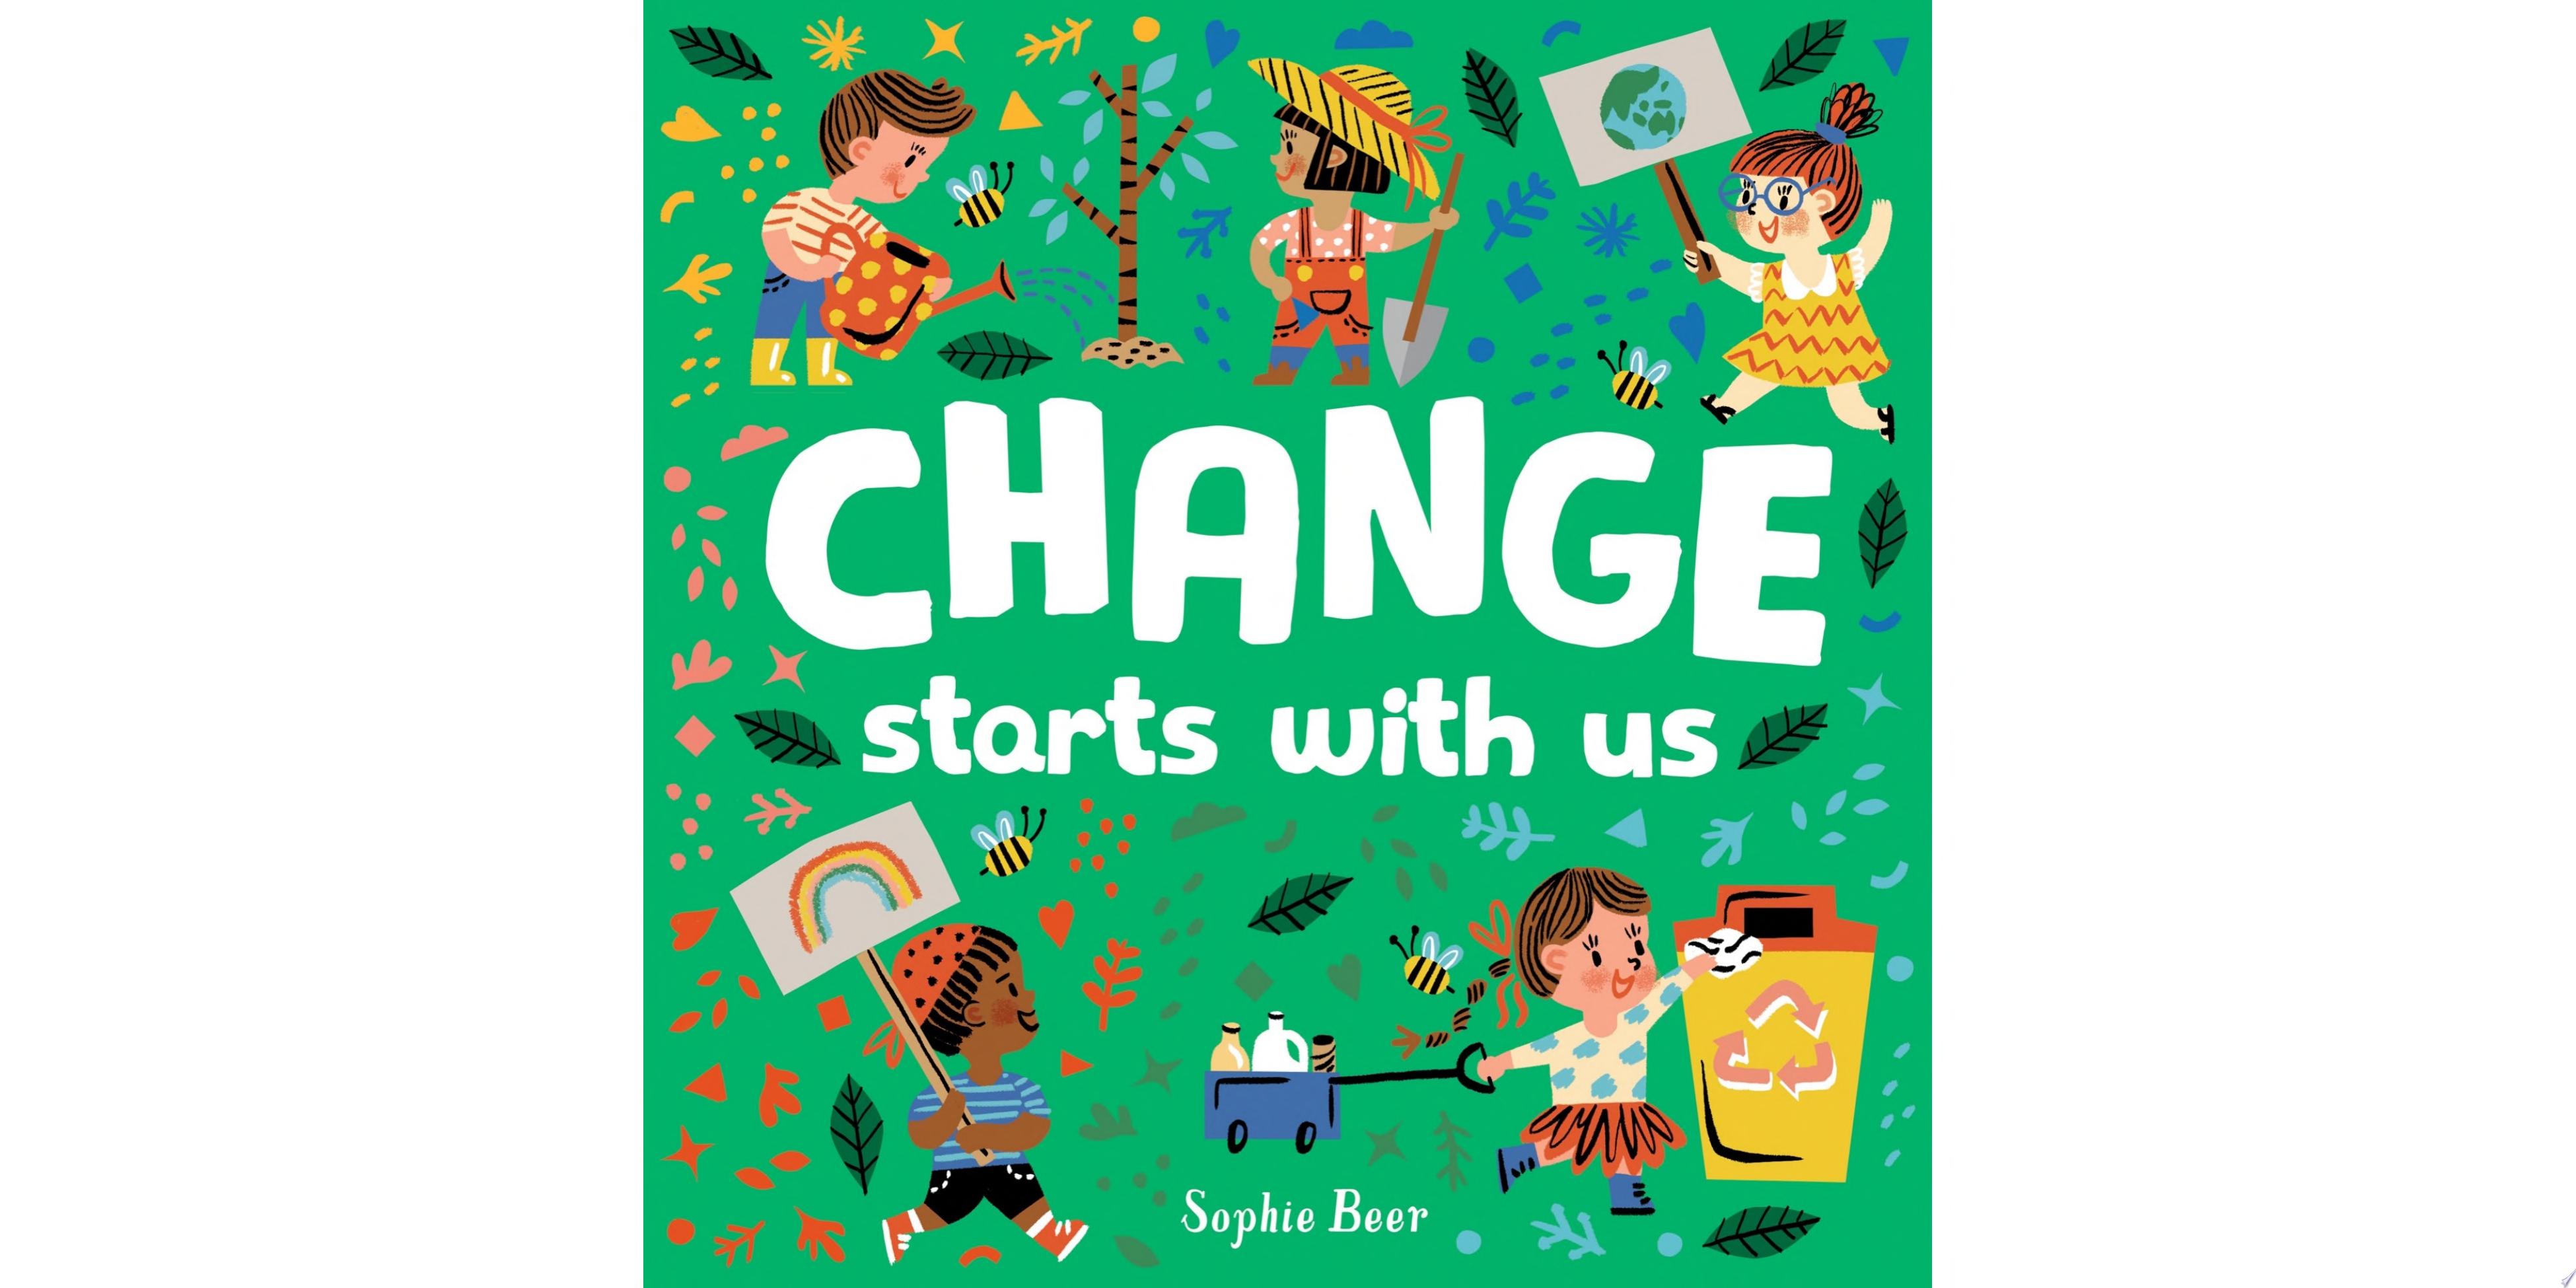 Image for "Change Starts with Us"